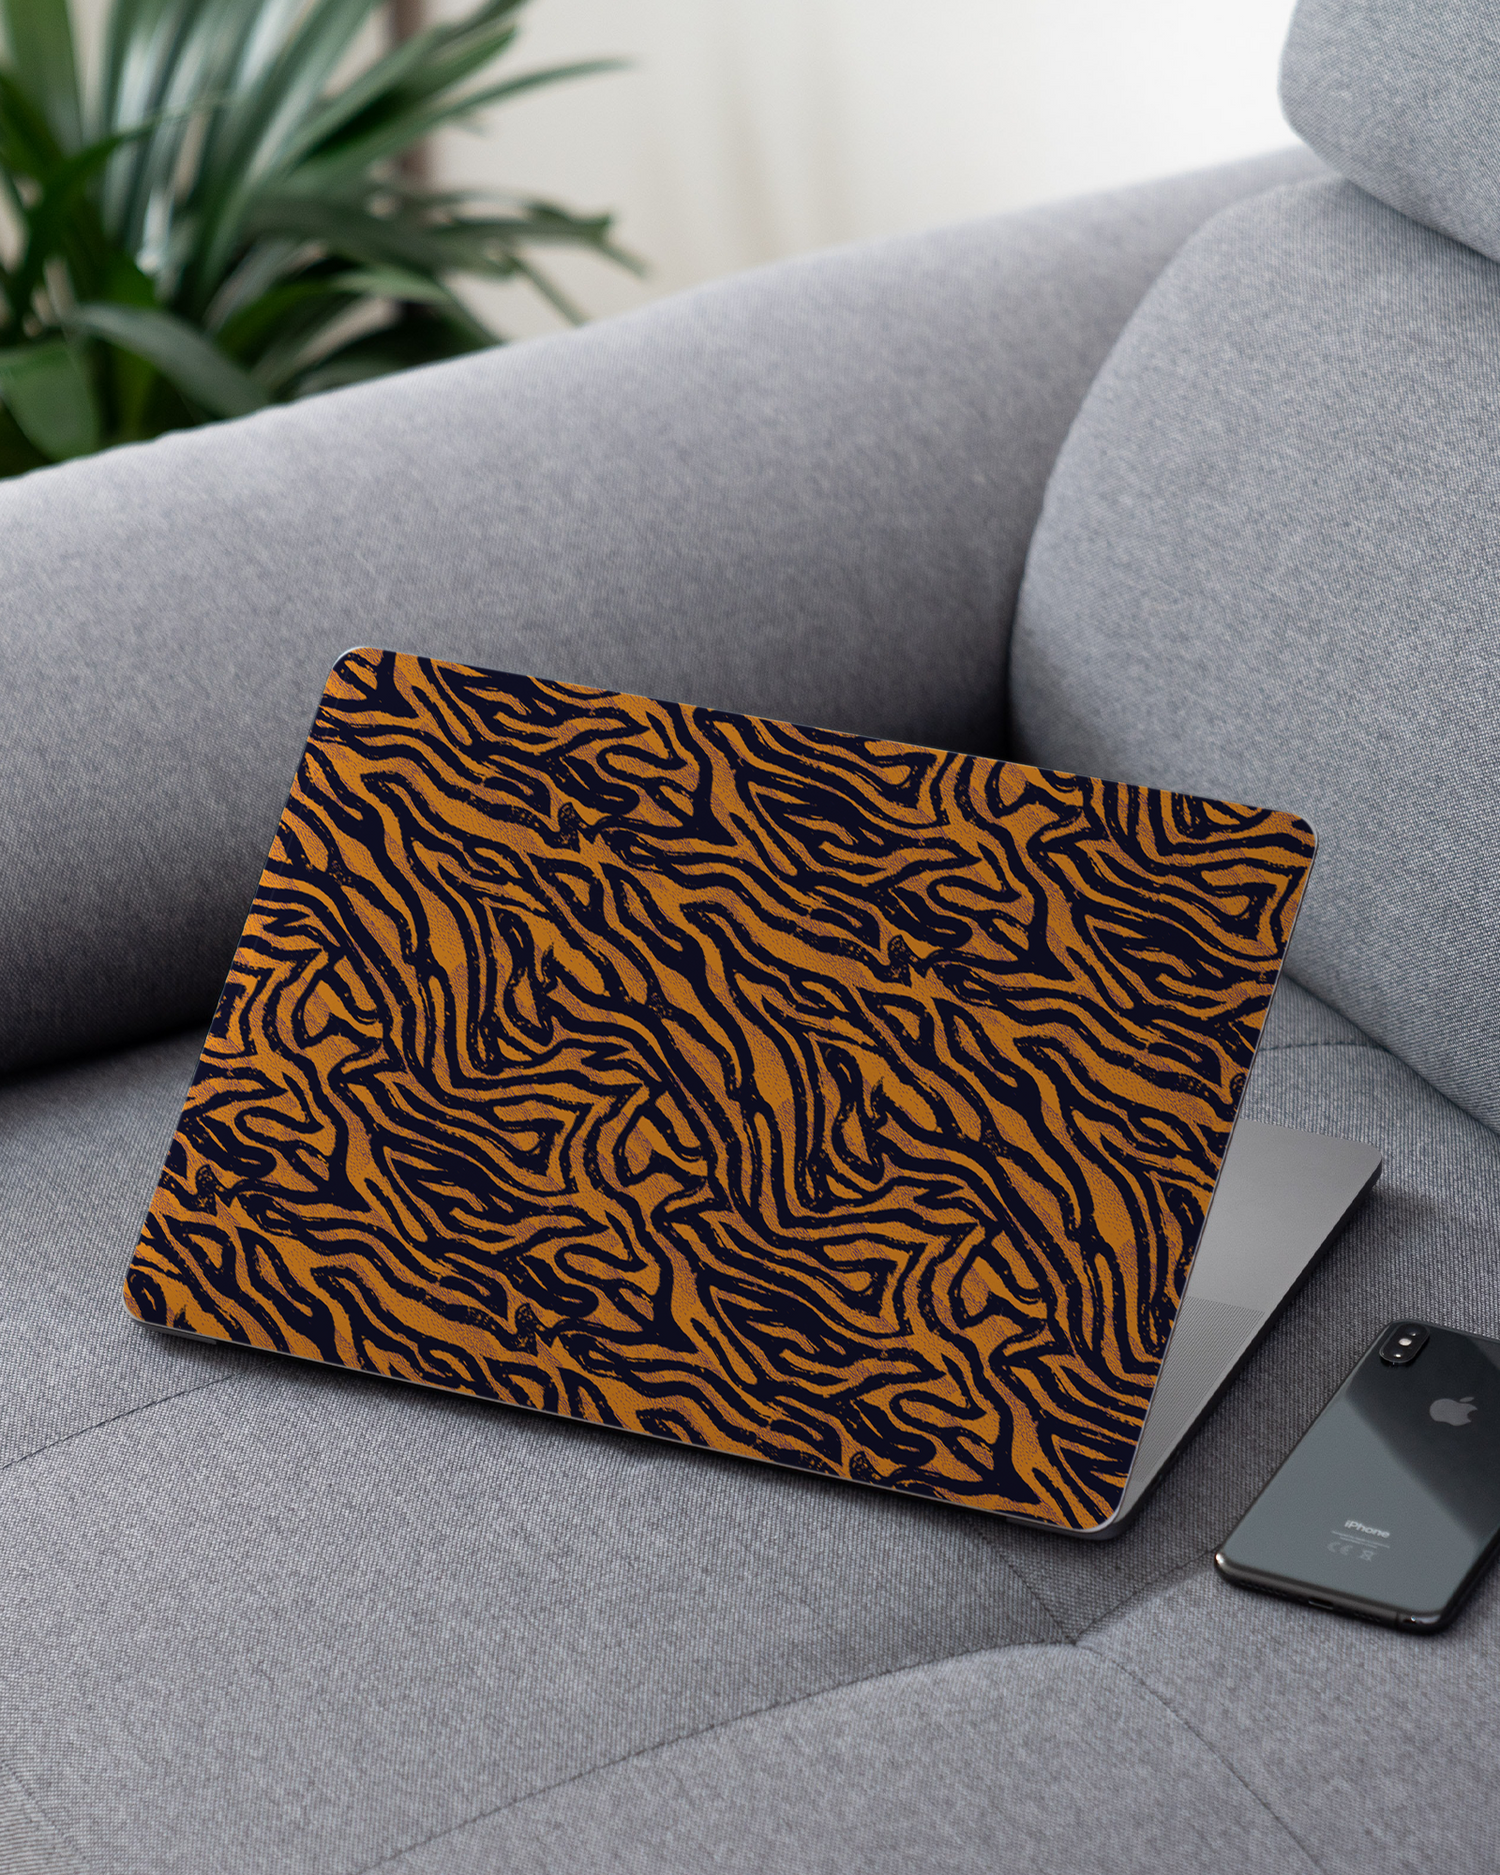 Tiger Zebra Skins Laptop Skin for 13 inch Apple MacBooks on a couch